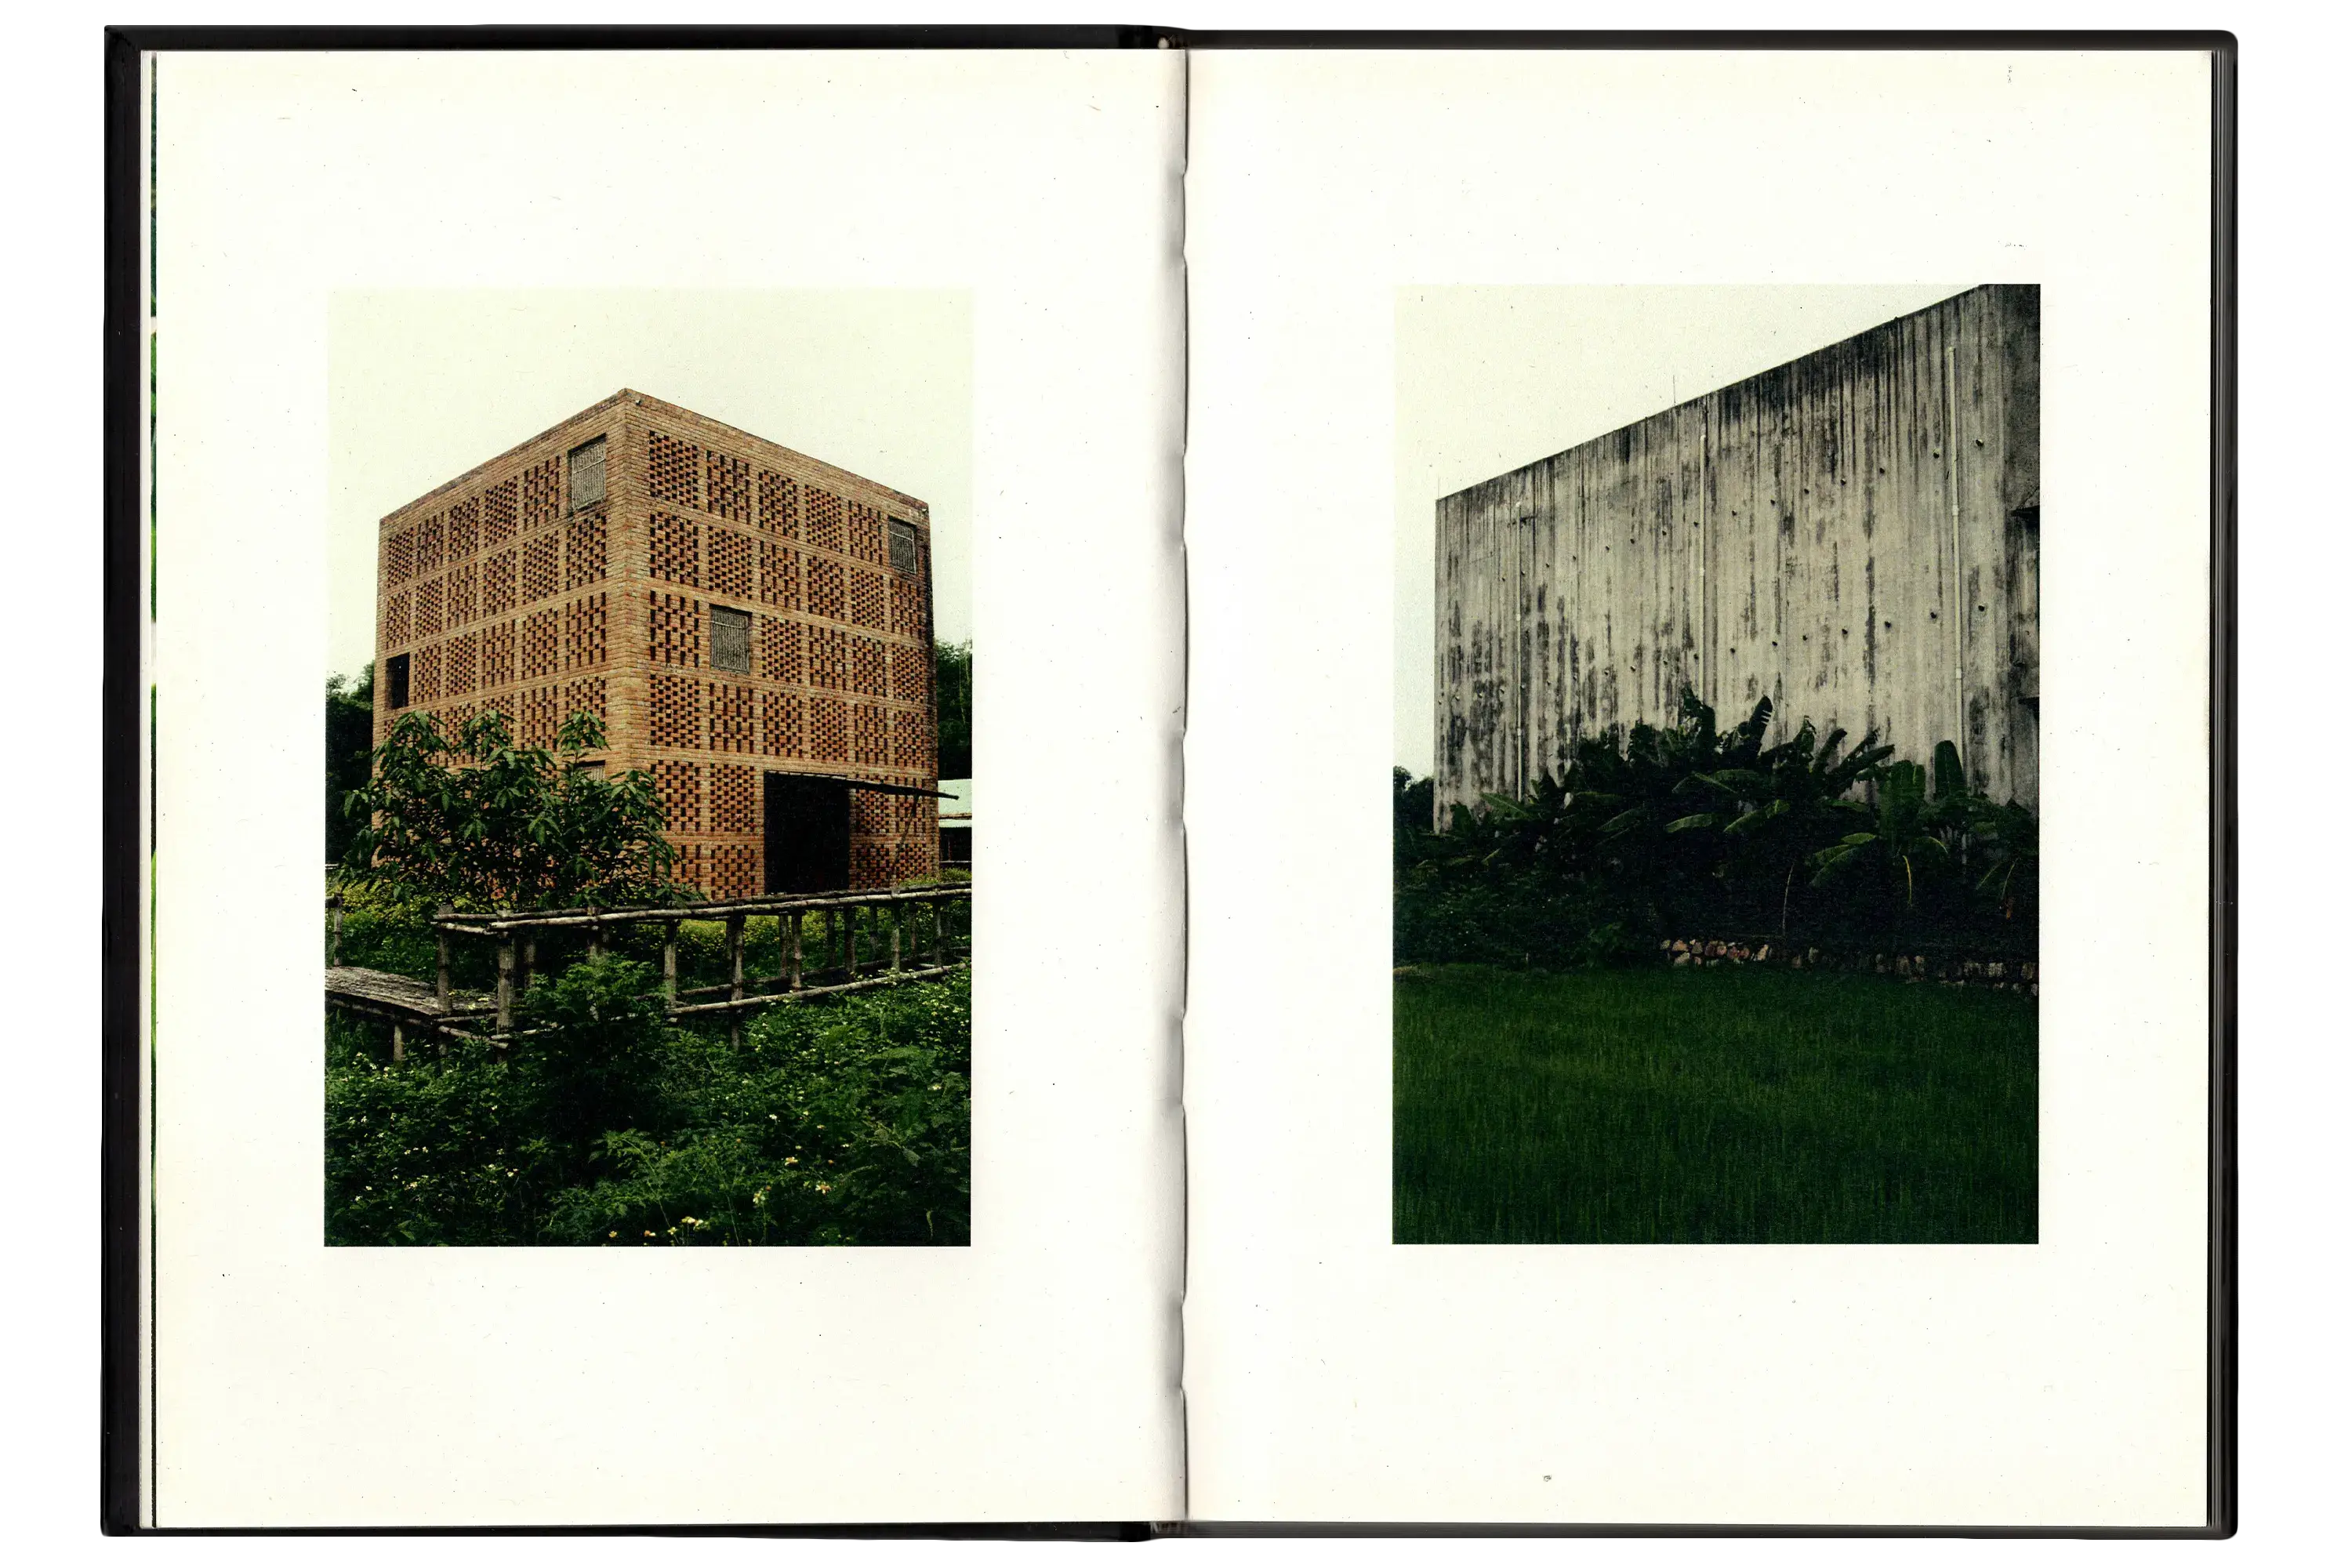 Imperfect Photo Book - left page shows large brick structure set in a forest of trees, right page image shows large concrete structure in forest of trees